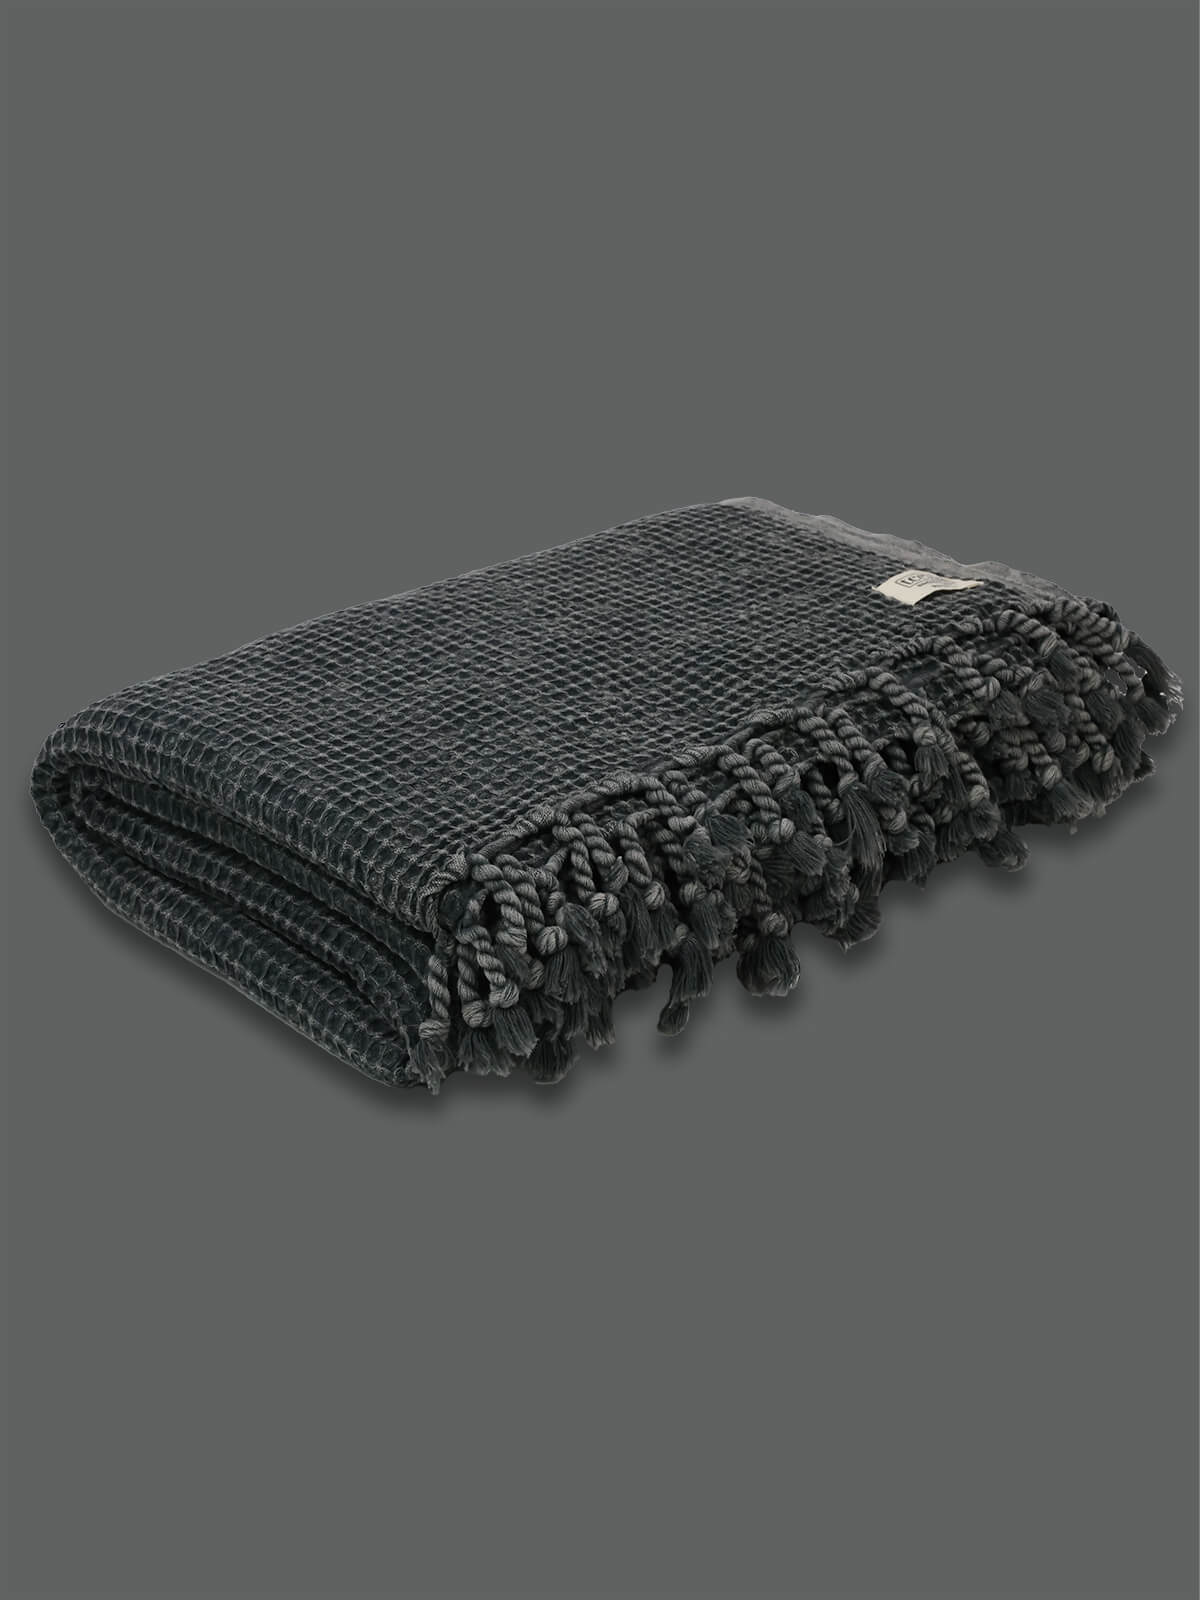 The Waffle Blanket in Charcoal